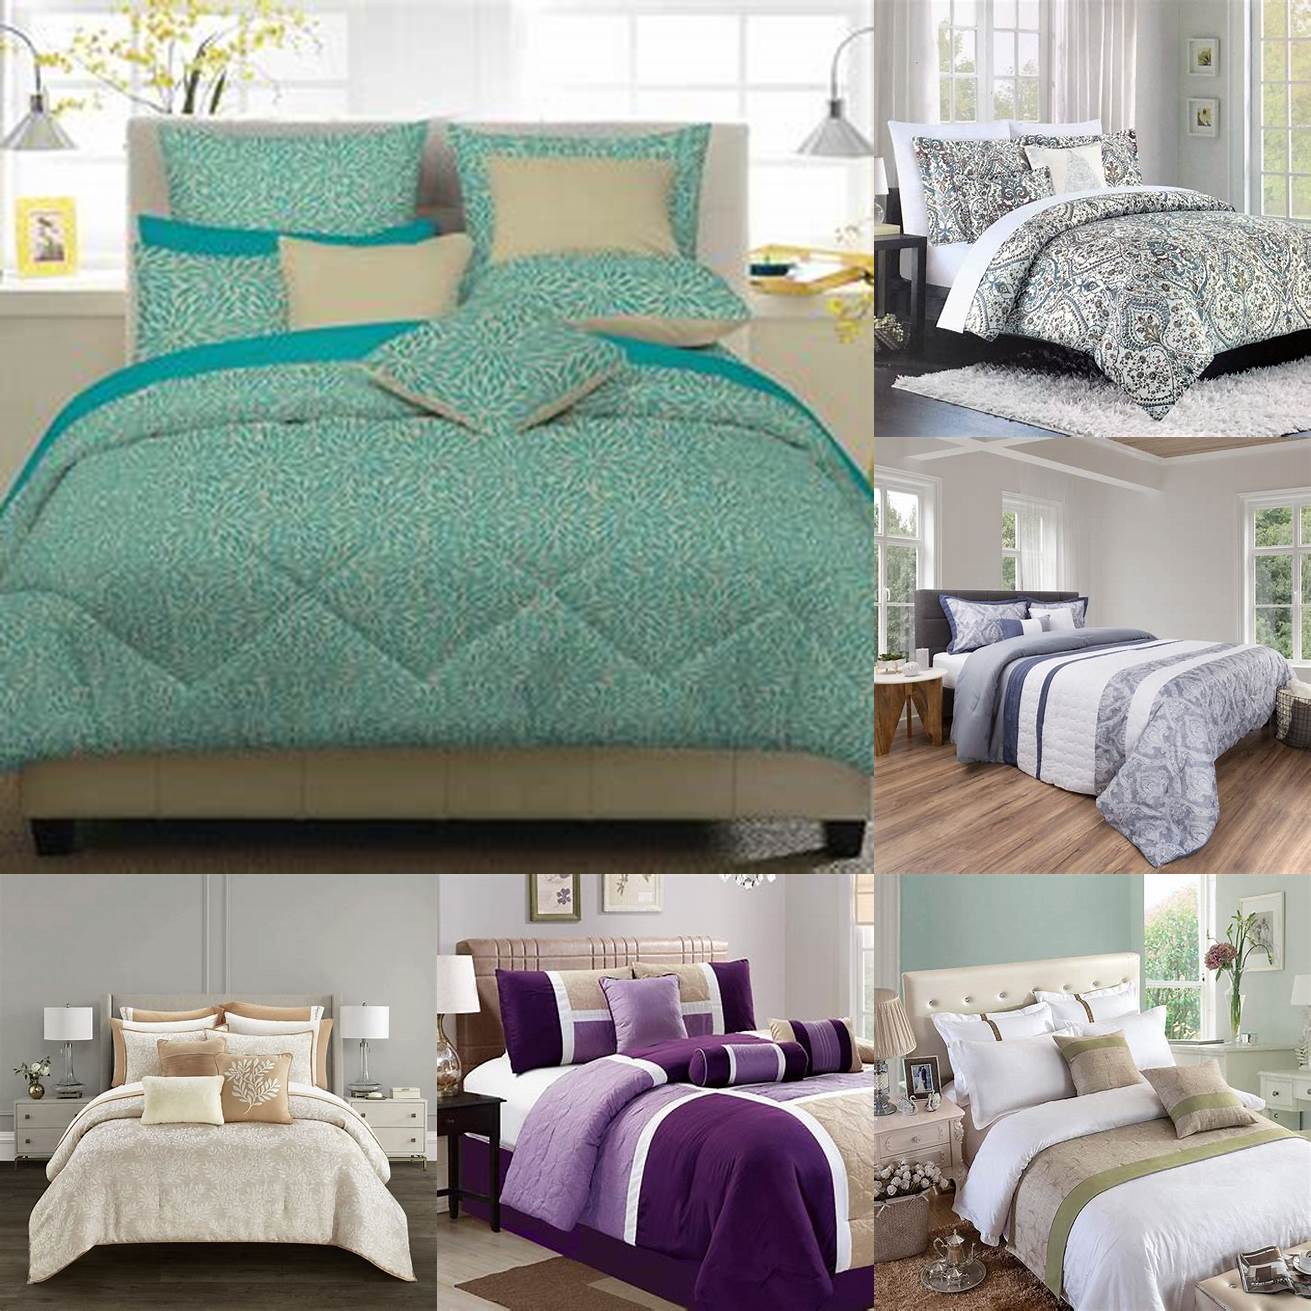 Invest in quality bedding and linens